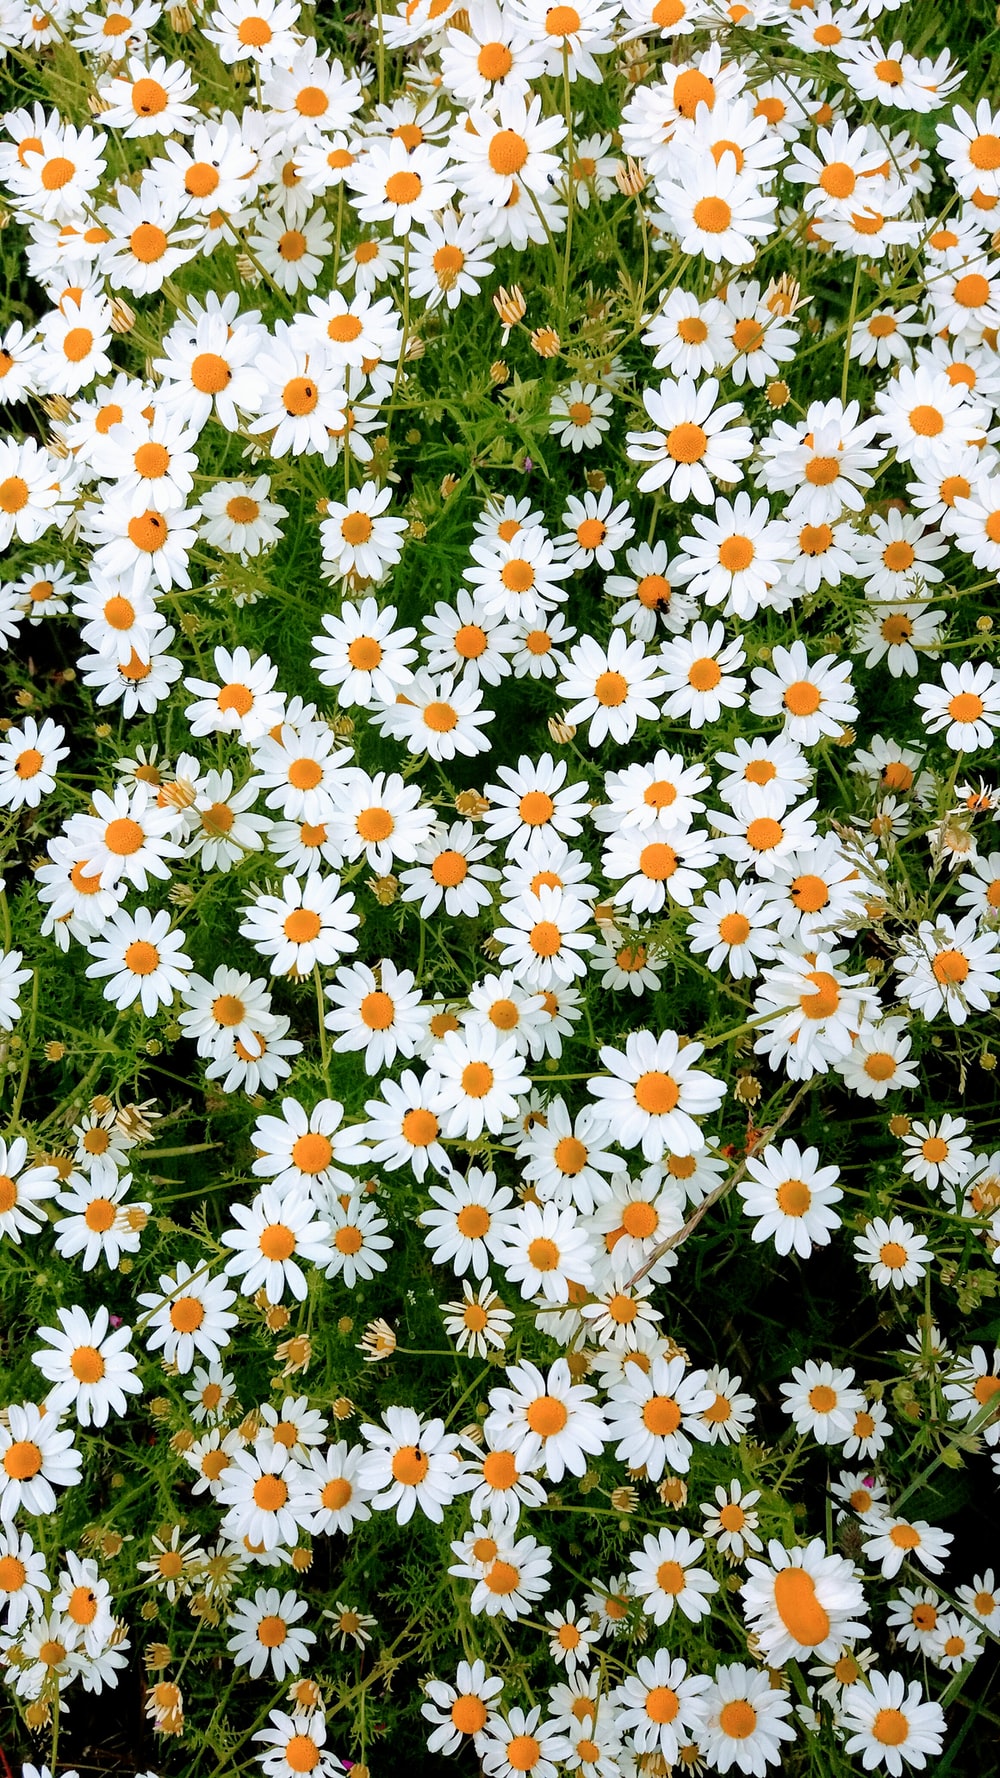 Small Daisy Mobile Phone Wallpaper Images Free Download on Lovepik   400459002